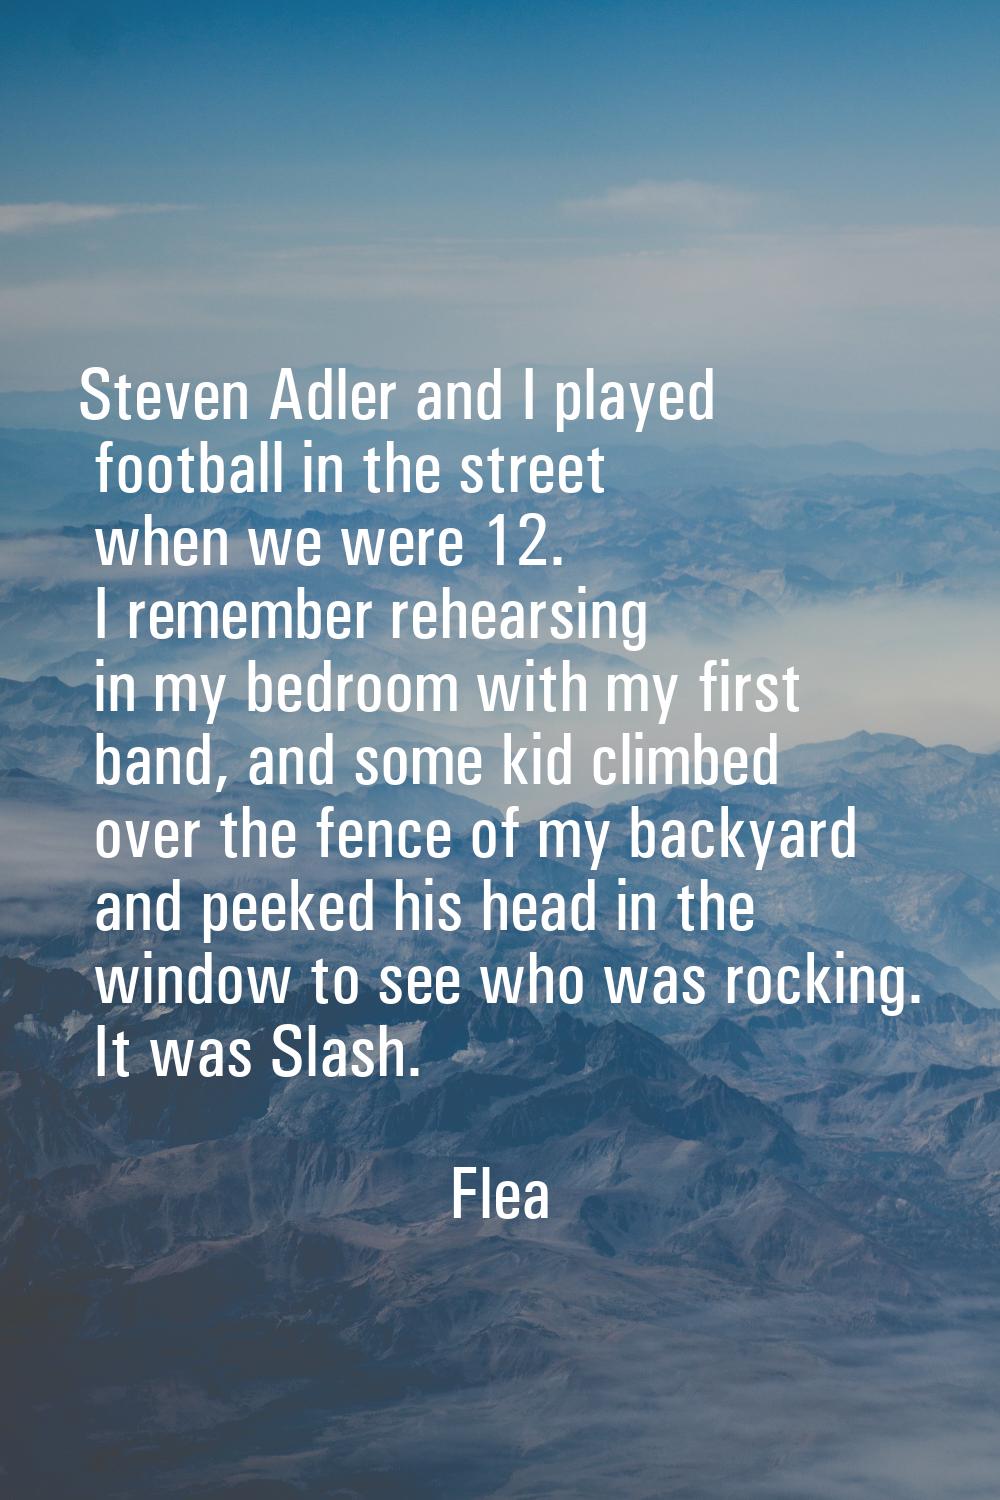 Steven Adler and I played football in the street when we were 12. I remember rehearsing in my bedro